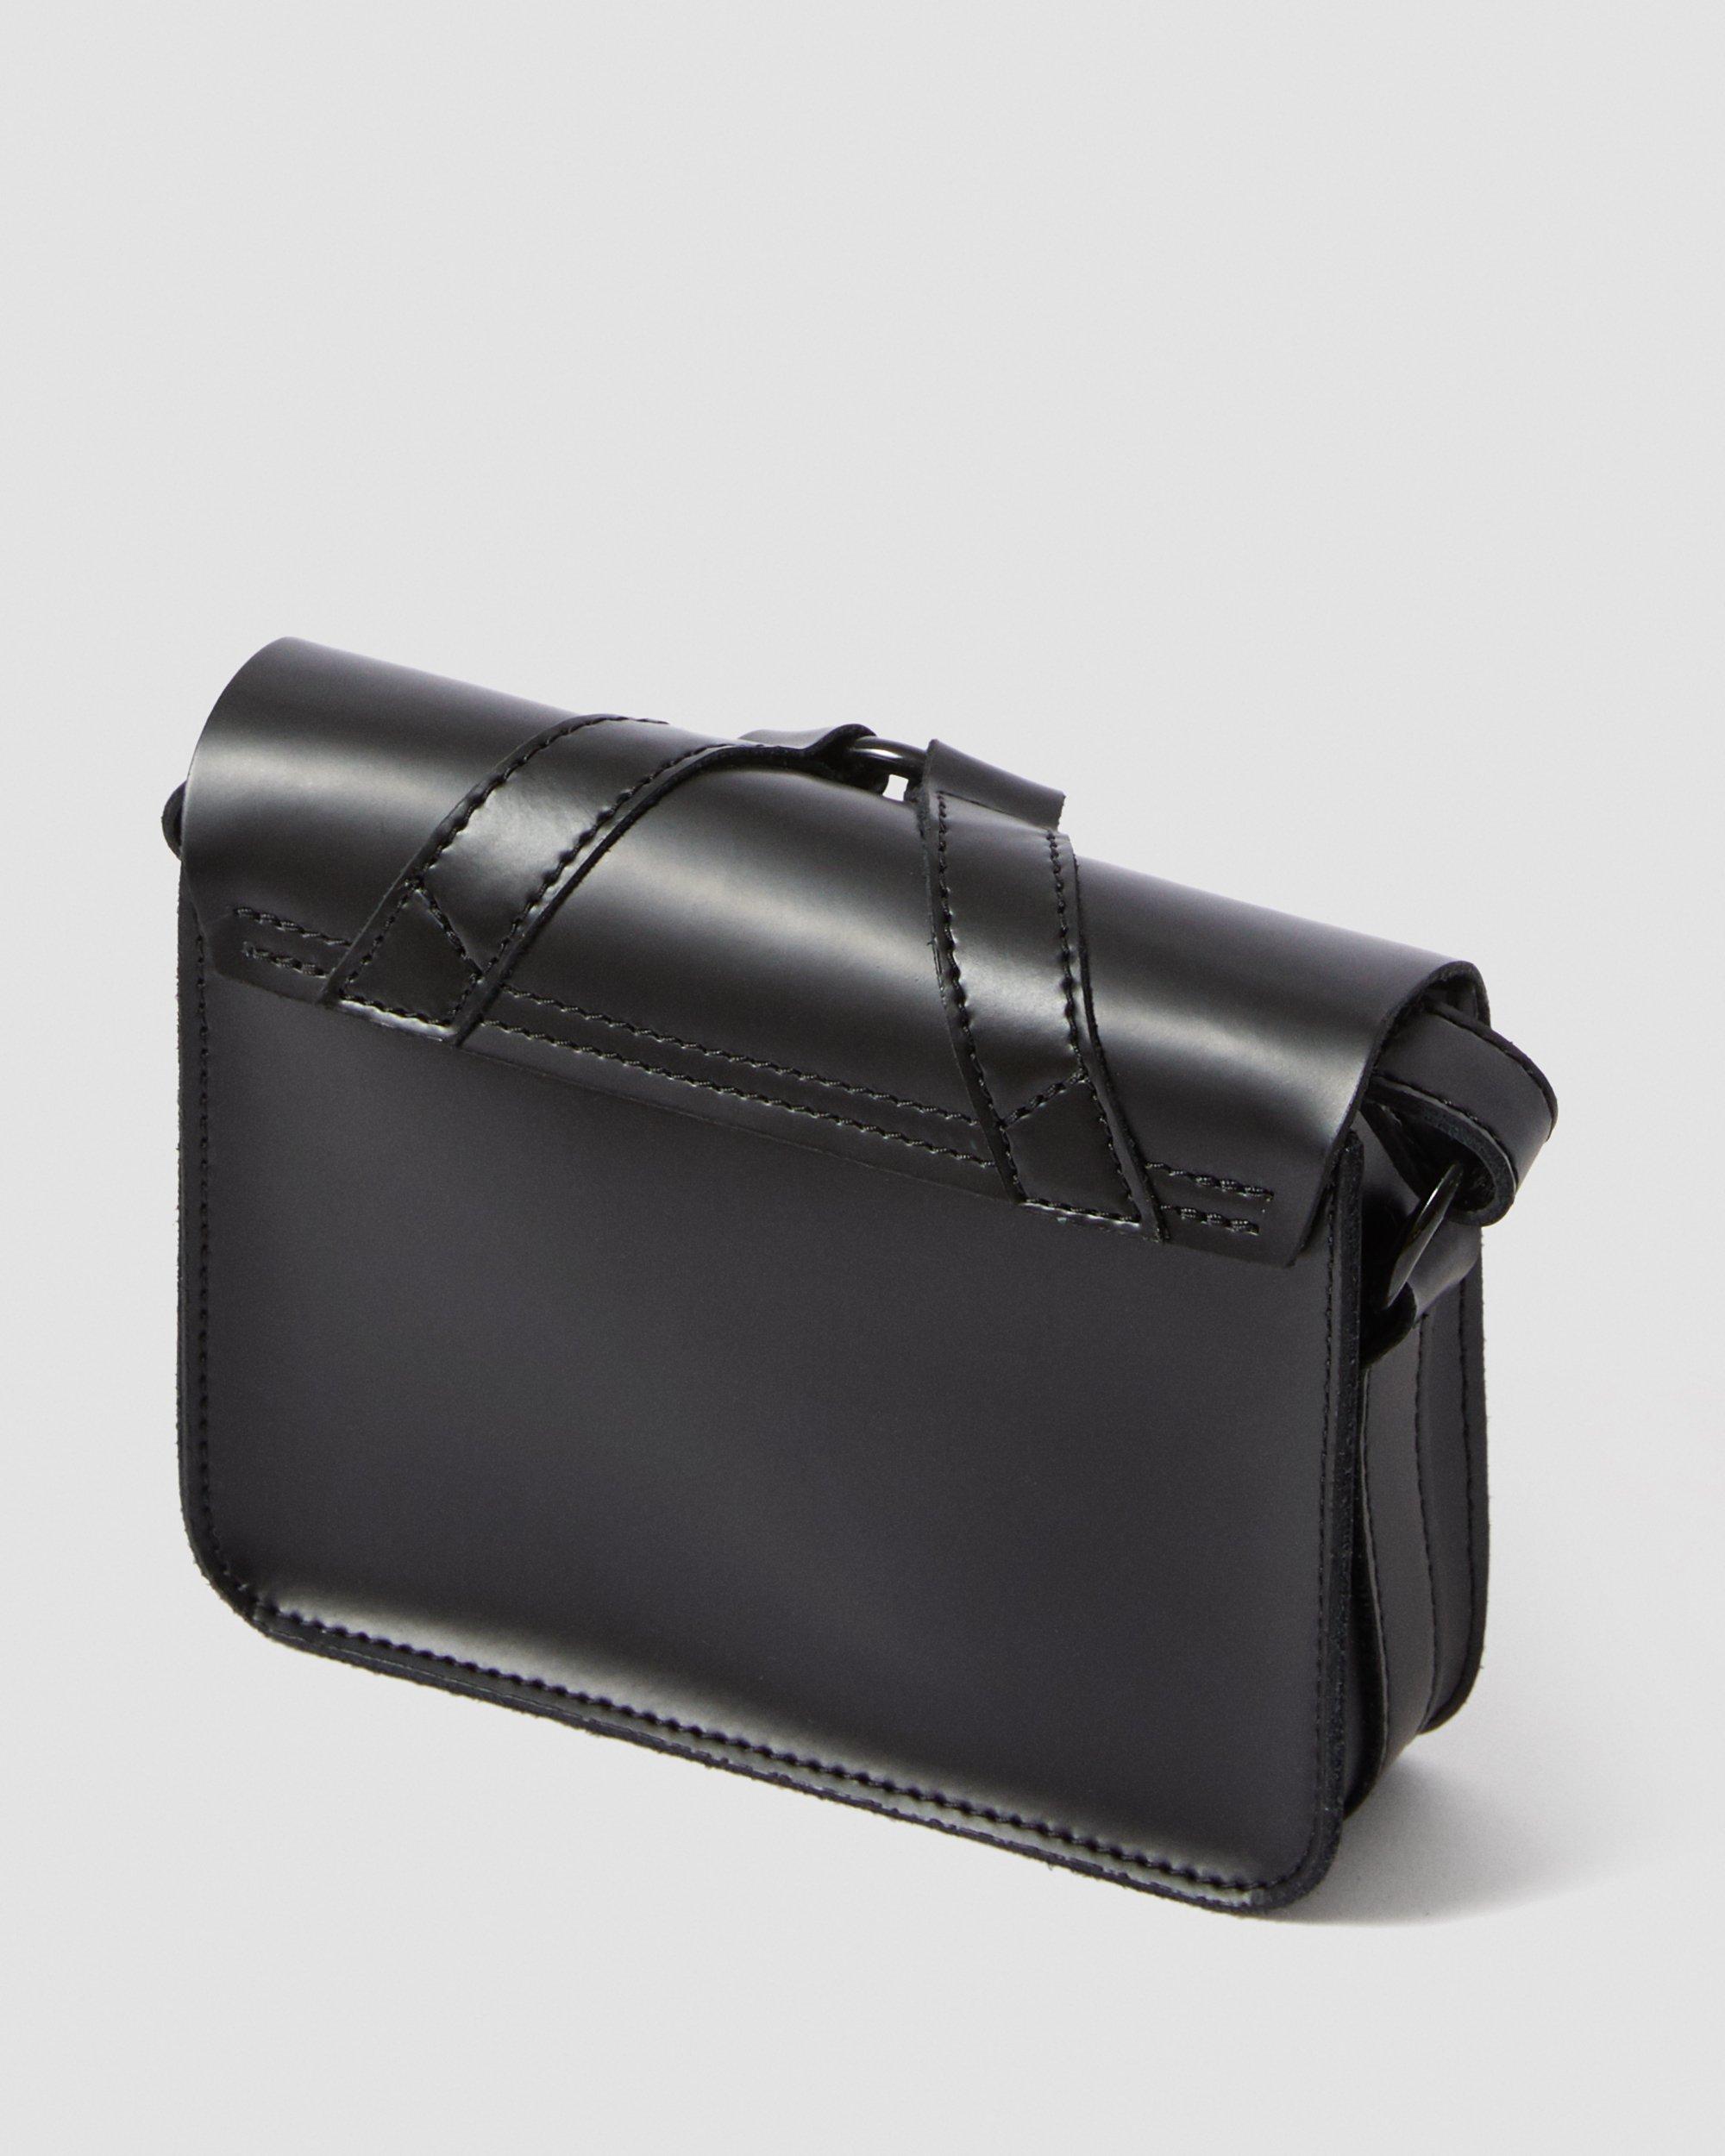 BUCKLE 7 INCH LEATHER SATCHEL in Black